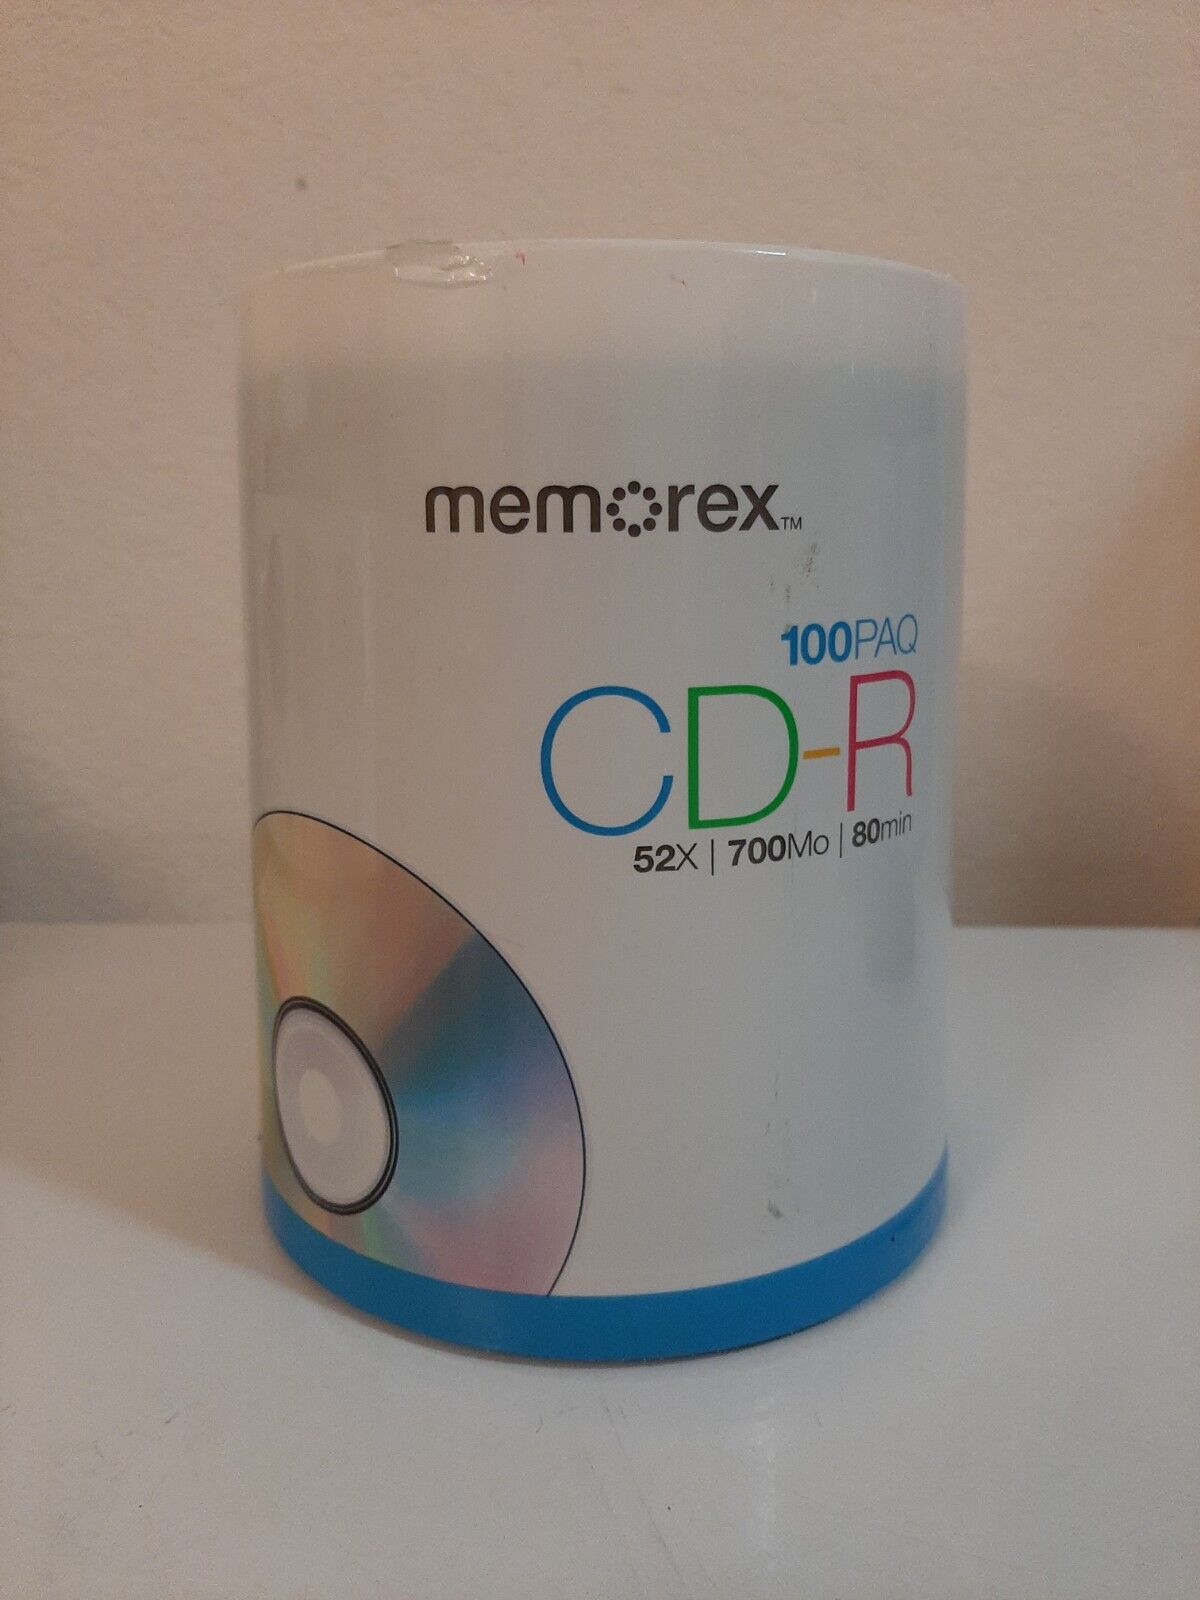 Memorex Large 100 Pack CD-R NEW and SEALED 52x 700Mo 80min Plastic Holder SALE